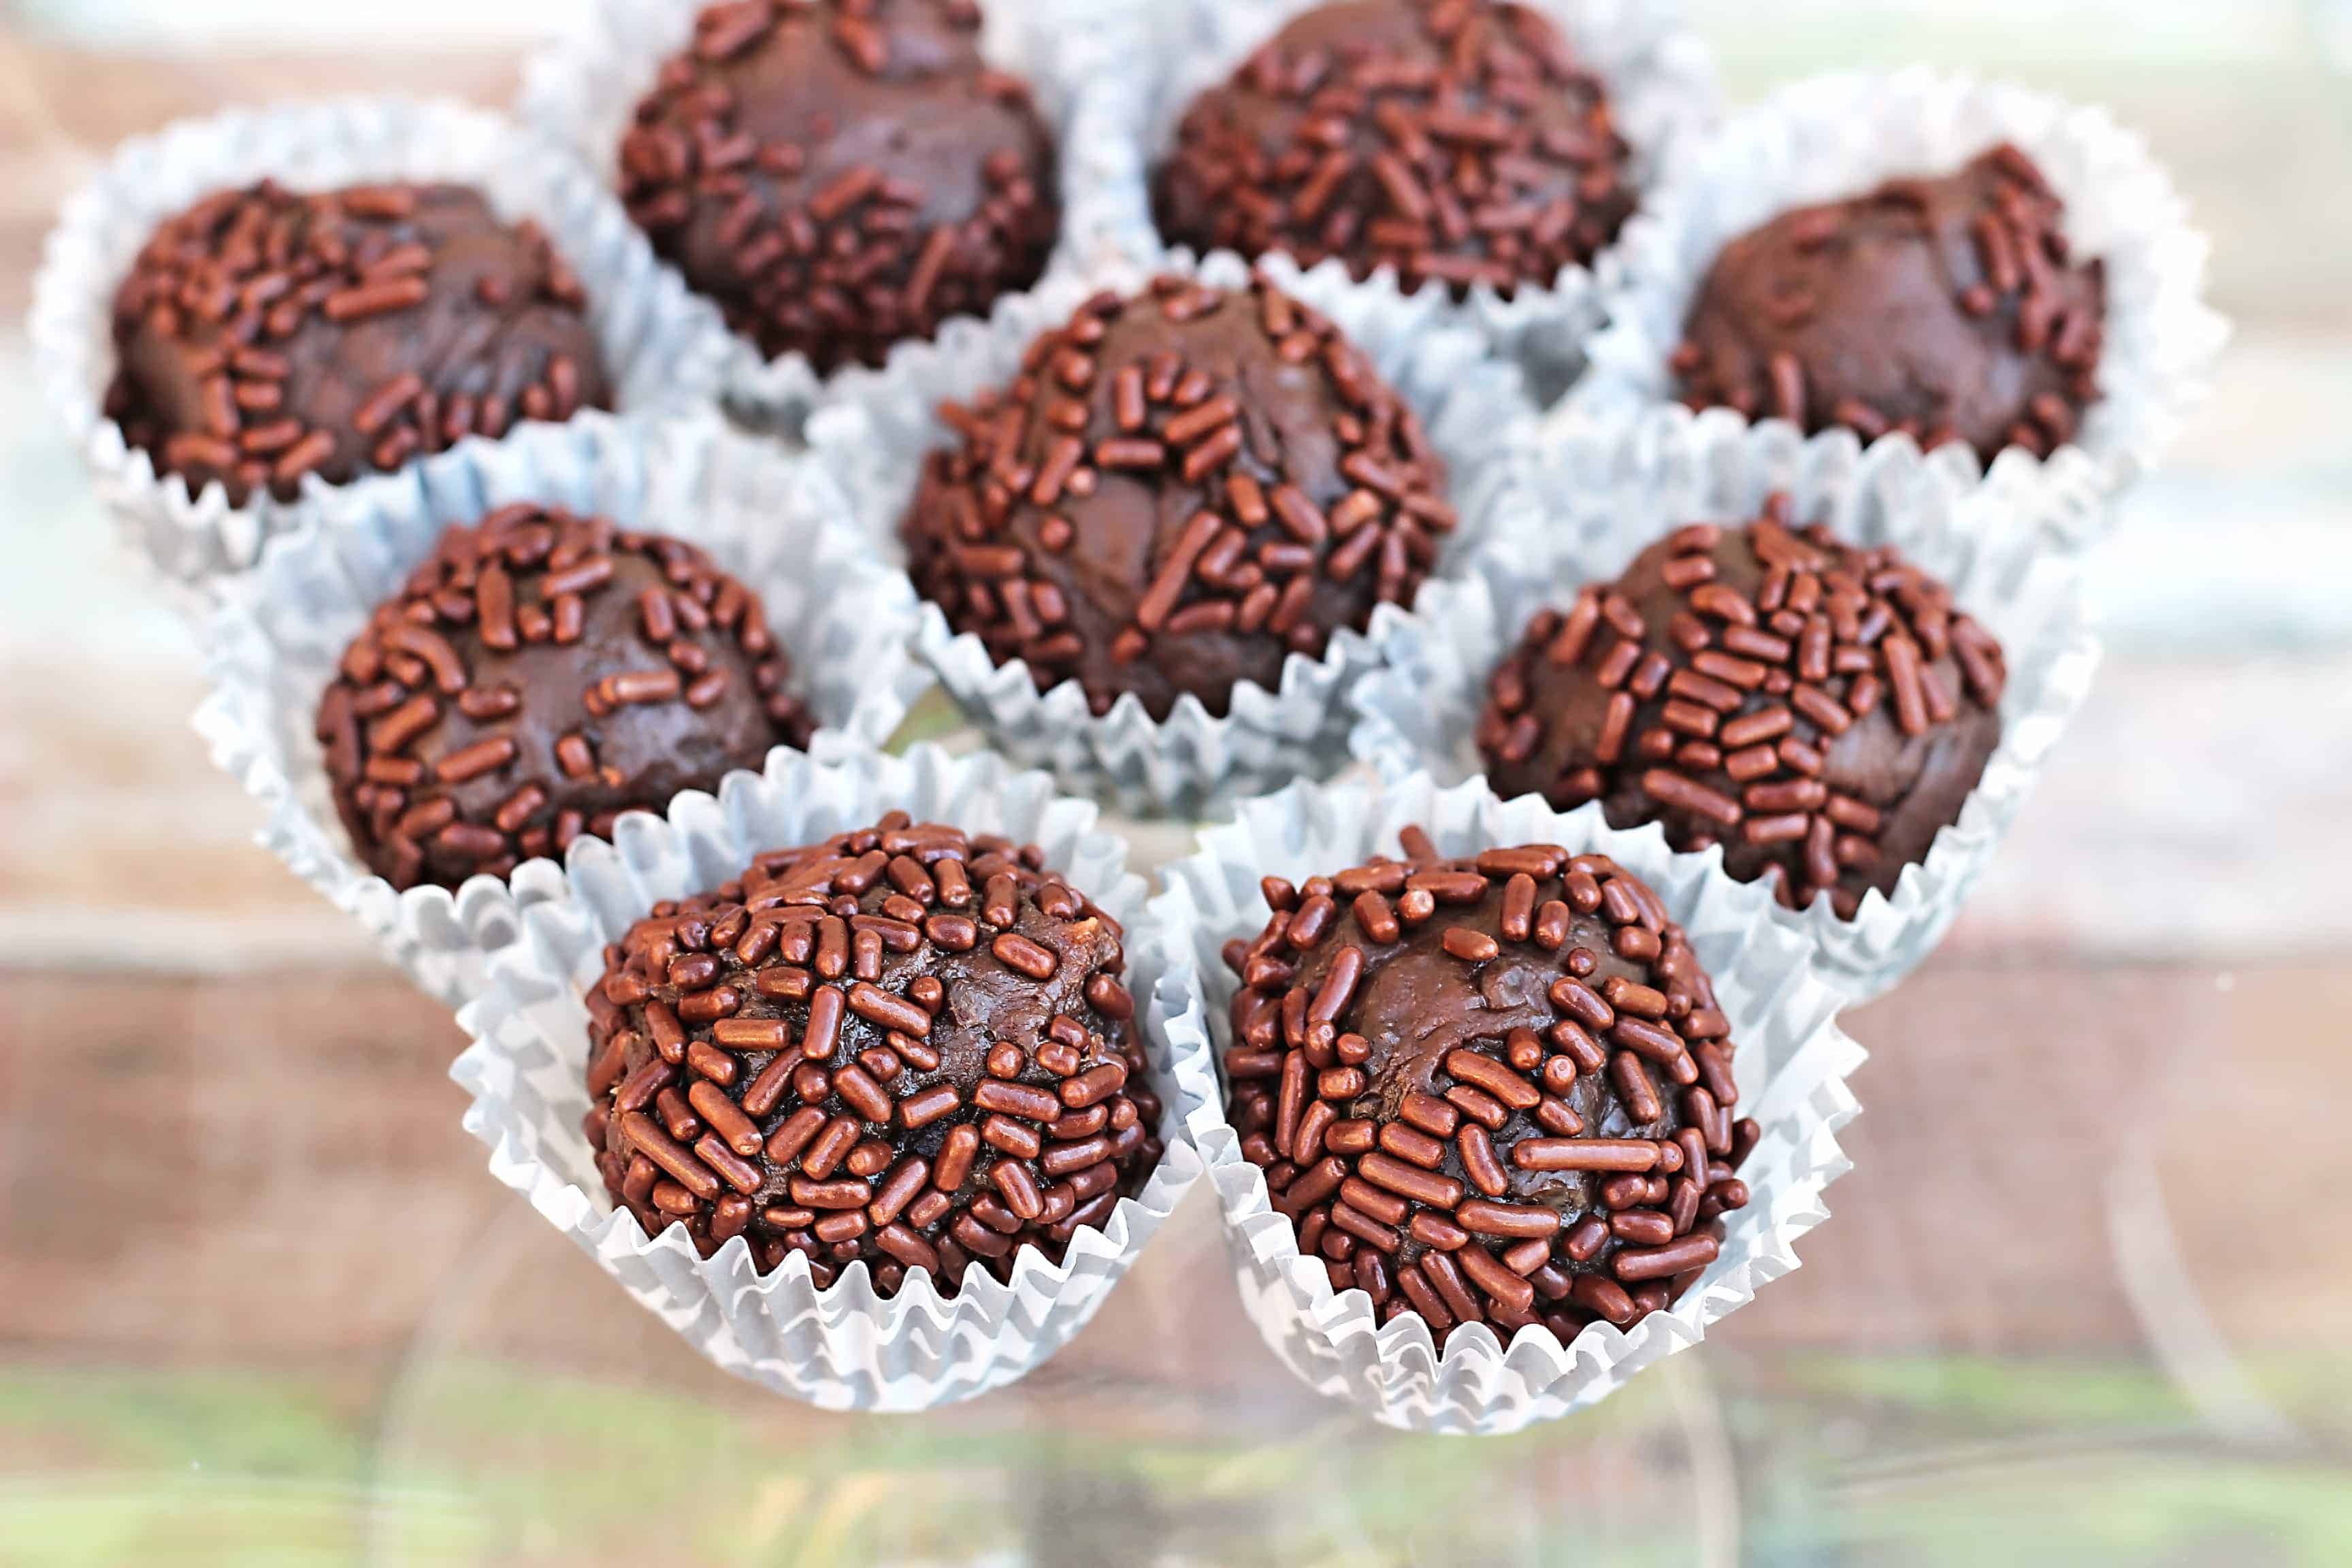 This Brazilian candy brigadeiro recipe is so easy to make that you'll want to get the kids to help. It tastes like a Tootsie Roll copycat recipe except richer!